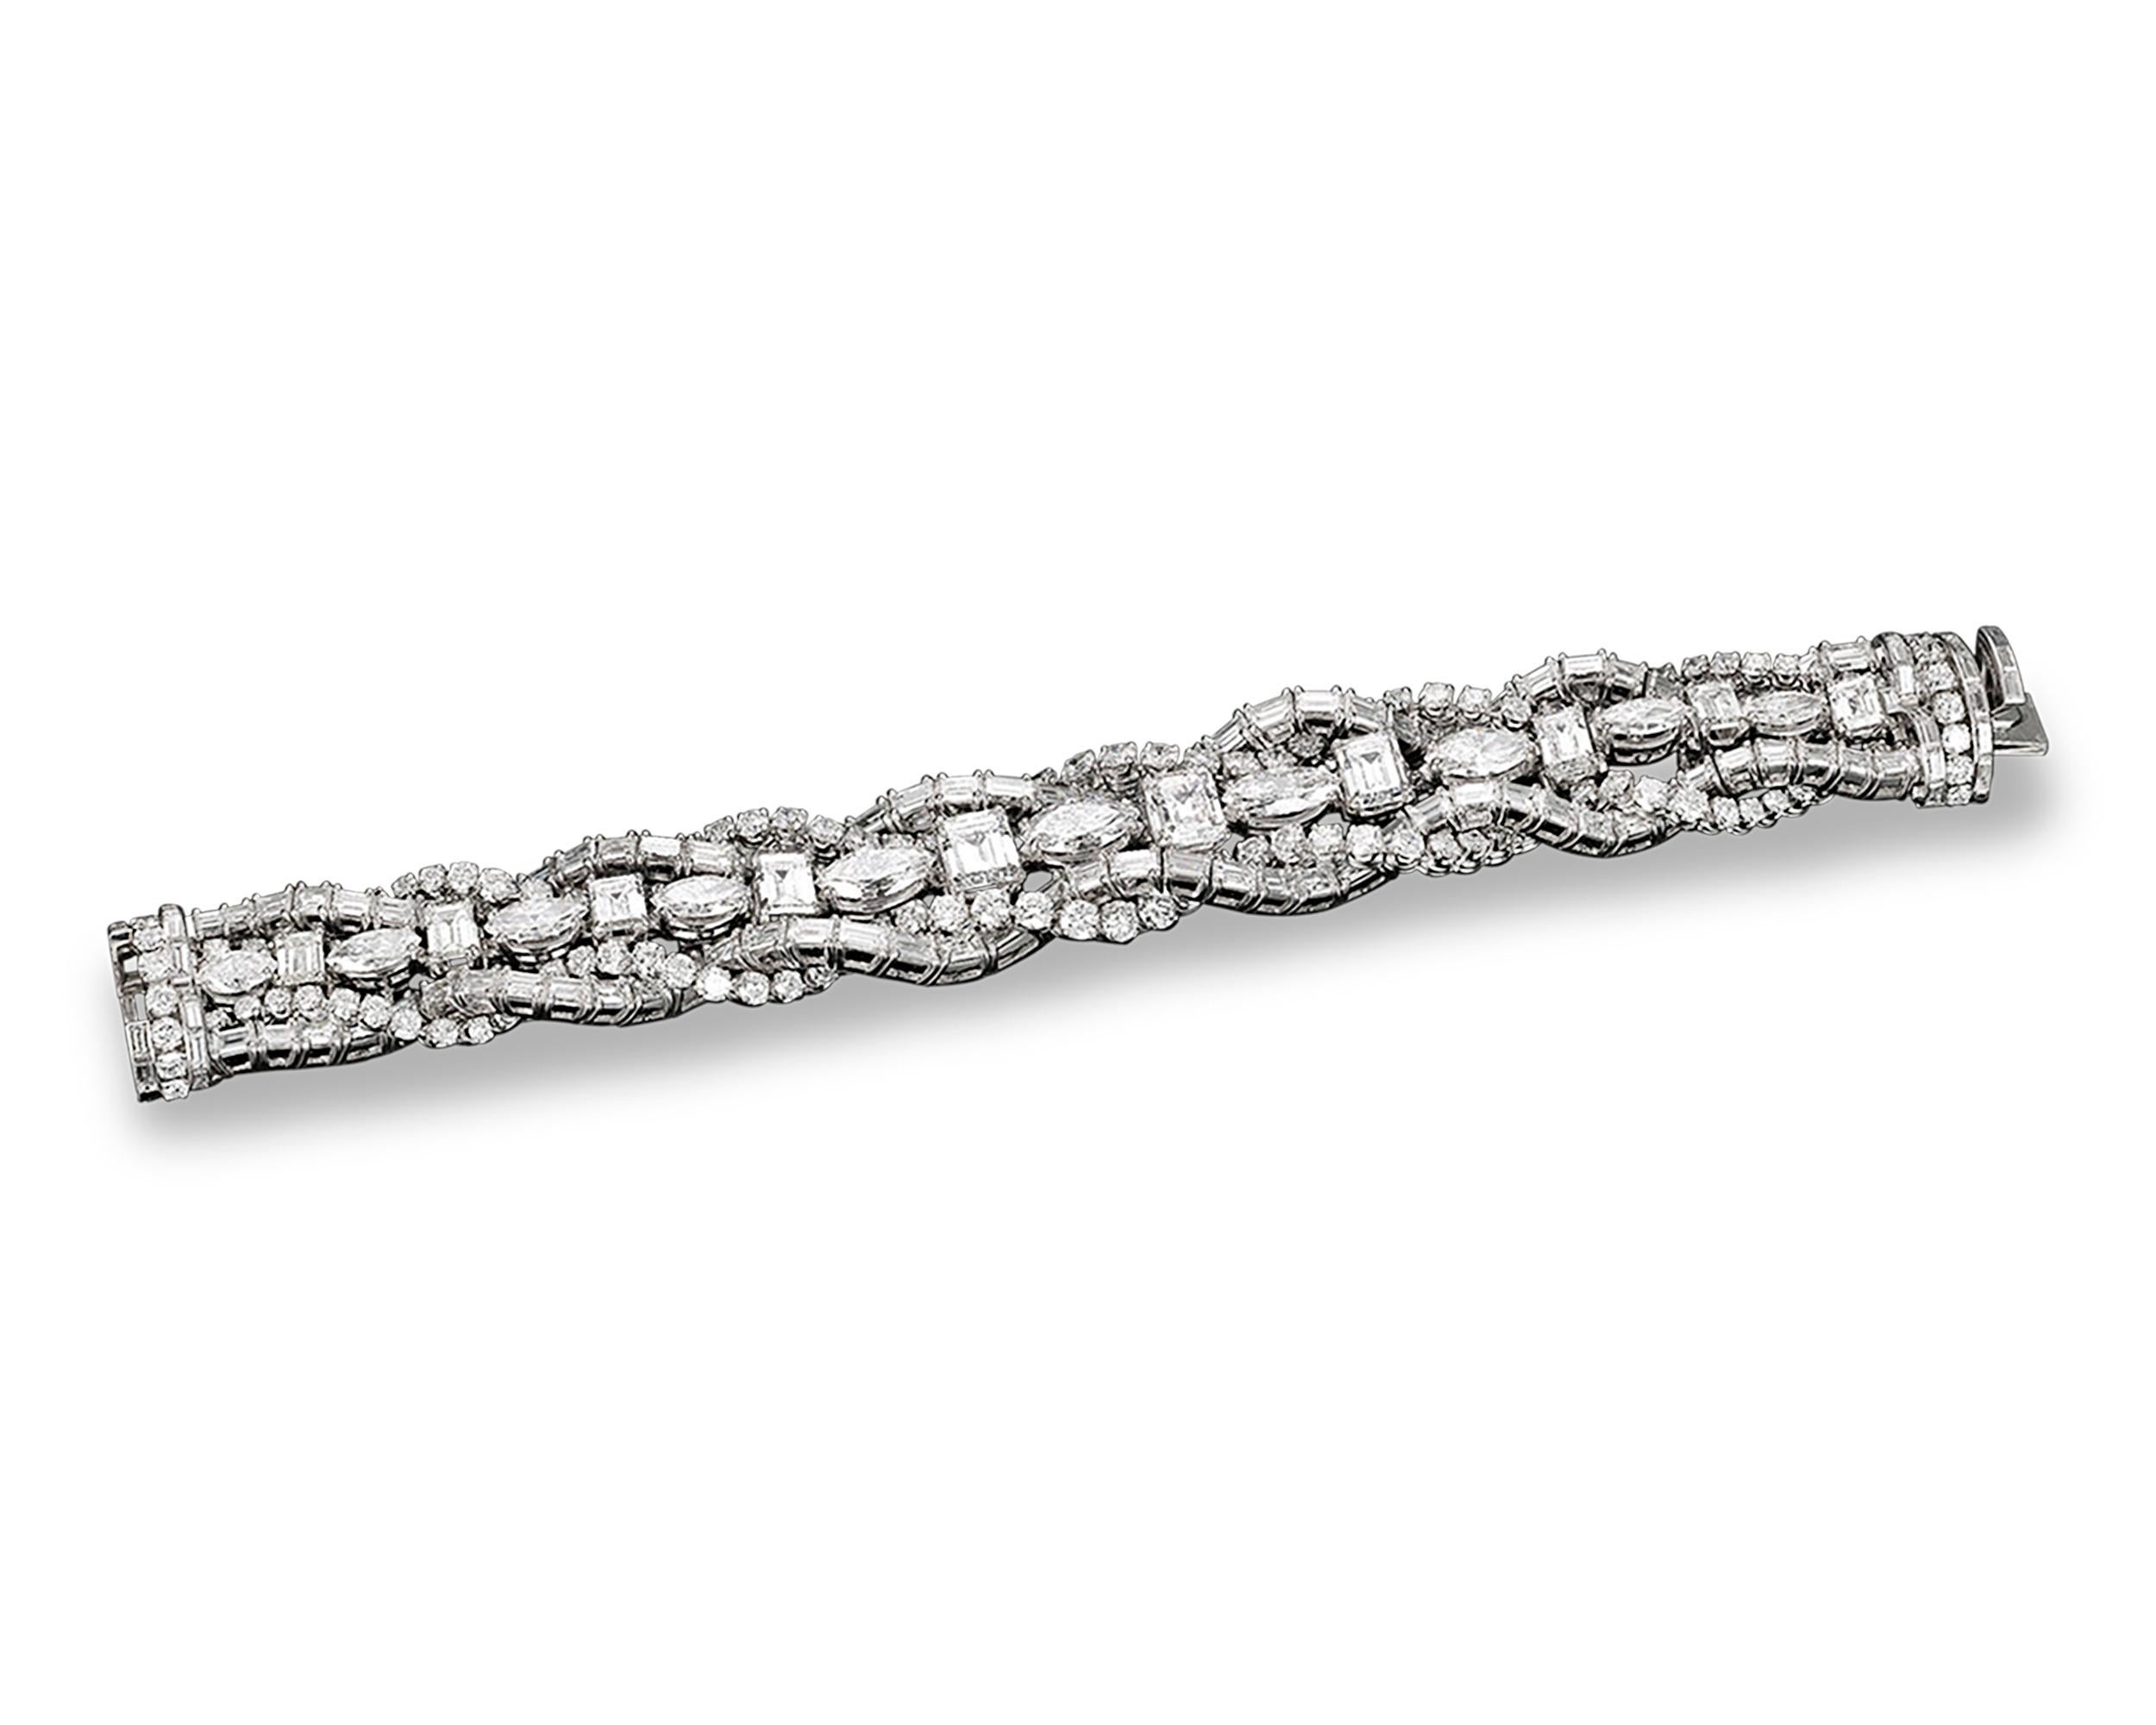 This impeccable French bracelet showcases a stunning collection of pure white diamonds. The largest five of these superb stones, weighing 9.19 total carats, are all certified by the GIA as D color. Boasting approximately 55.00 carats of diamonds in